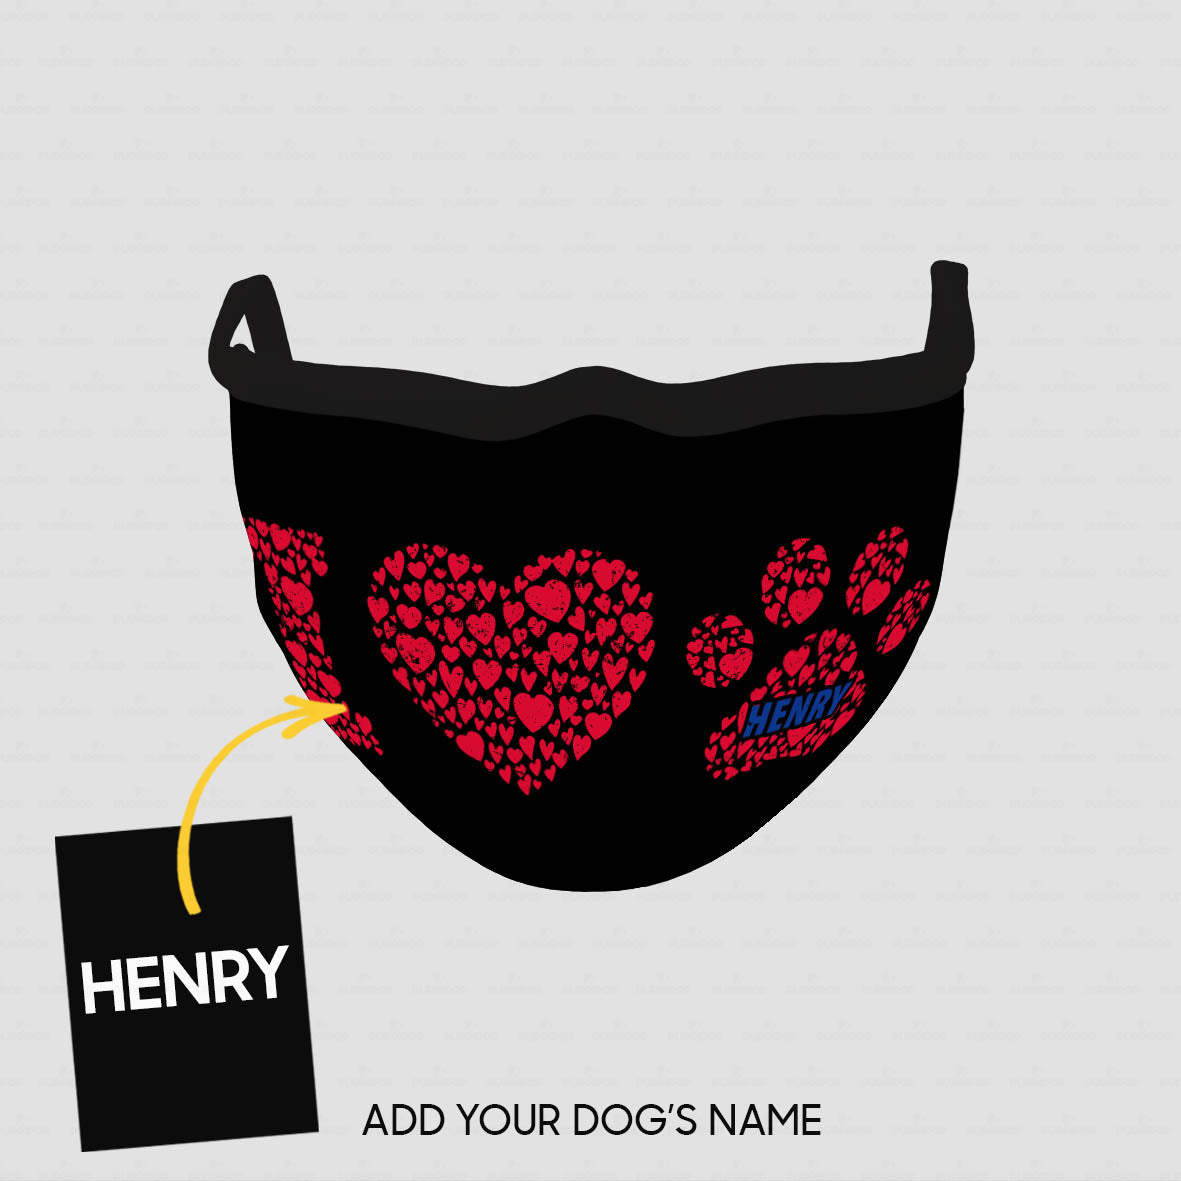 Personalized Dog Gift Idea - I Love Paw In Small Red Hearts For Dog Lovers - Cloth Mask